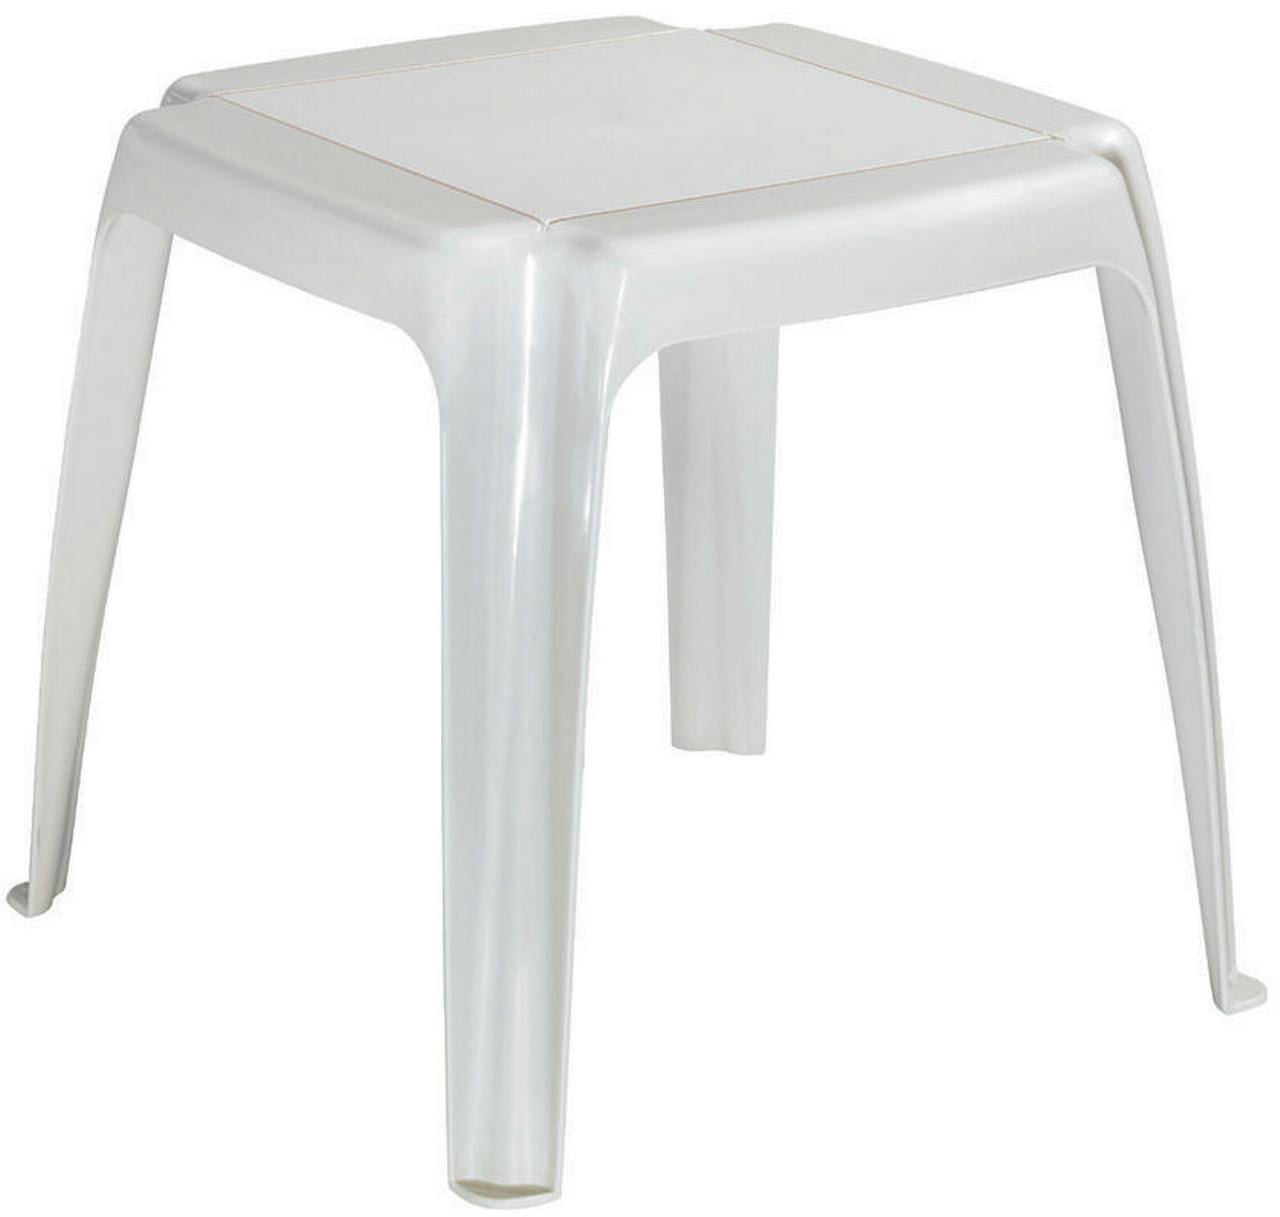 Stacking Side Table White Com, Outdoor Plastic Side Tables